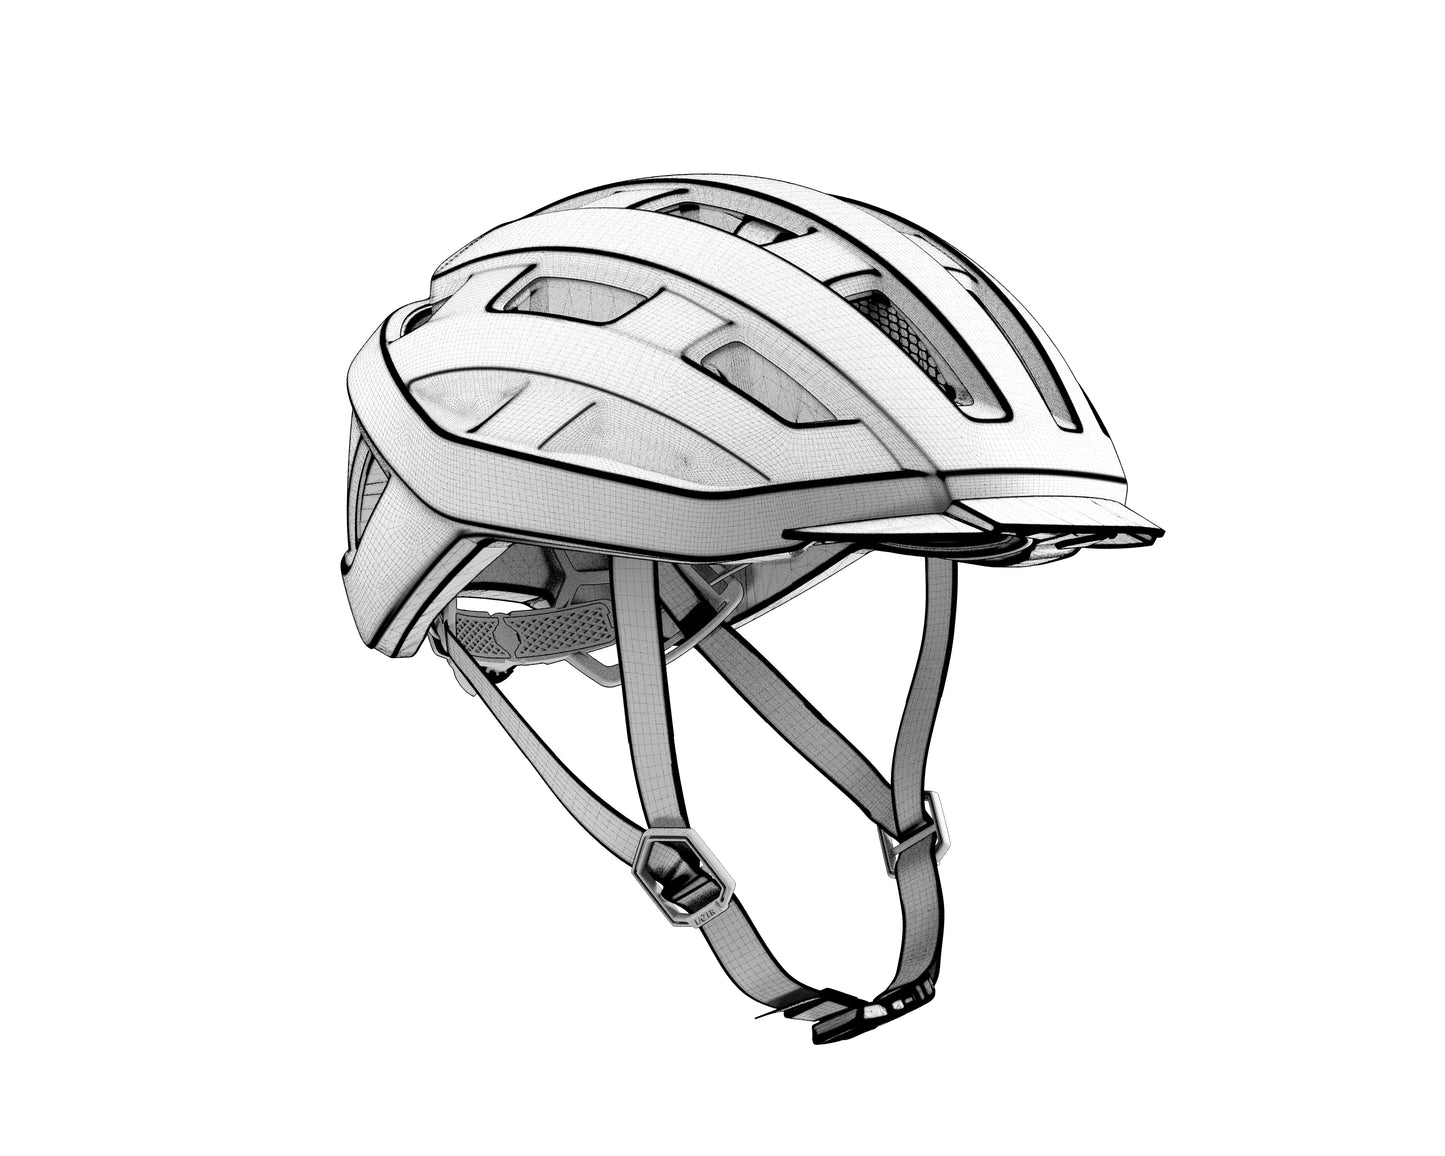 white clipped lazer helmet with black outlines that makes it look like a drawing on a white background